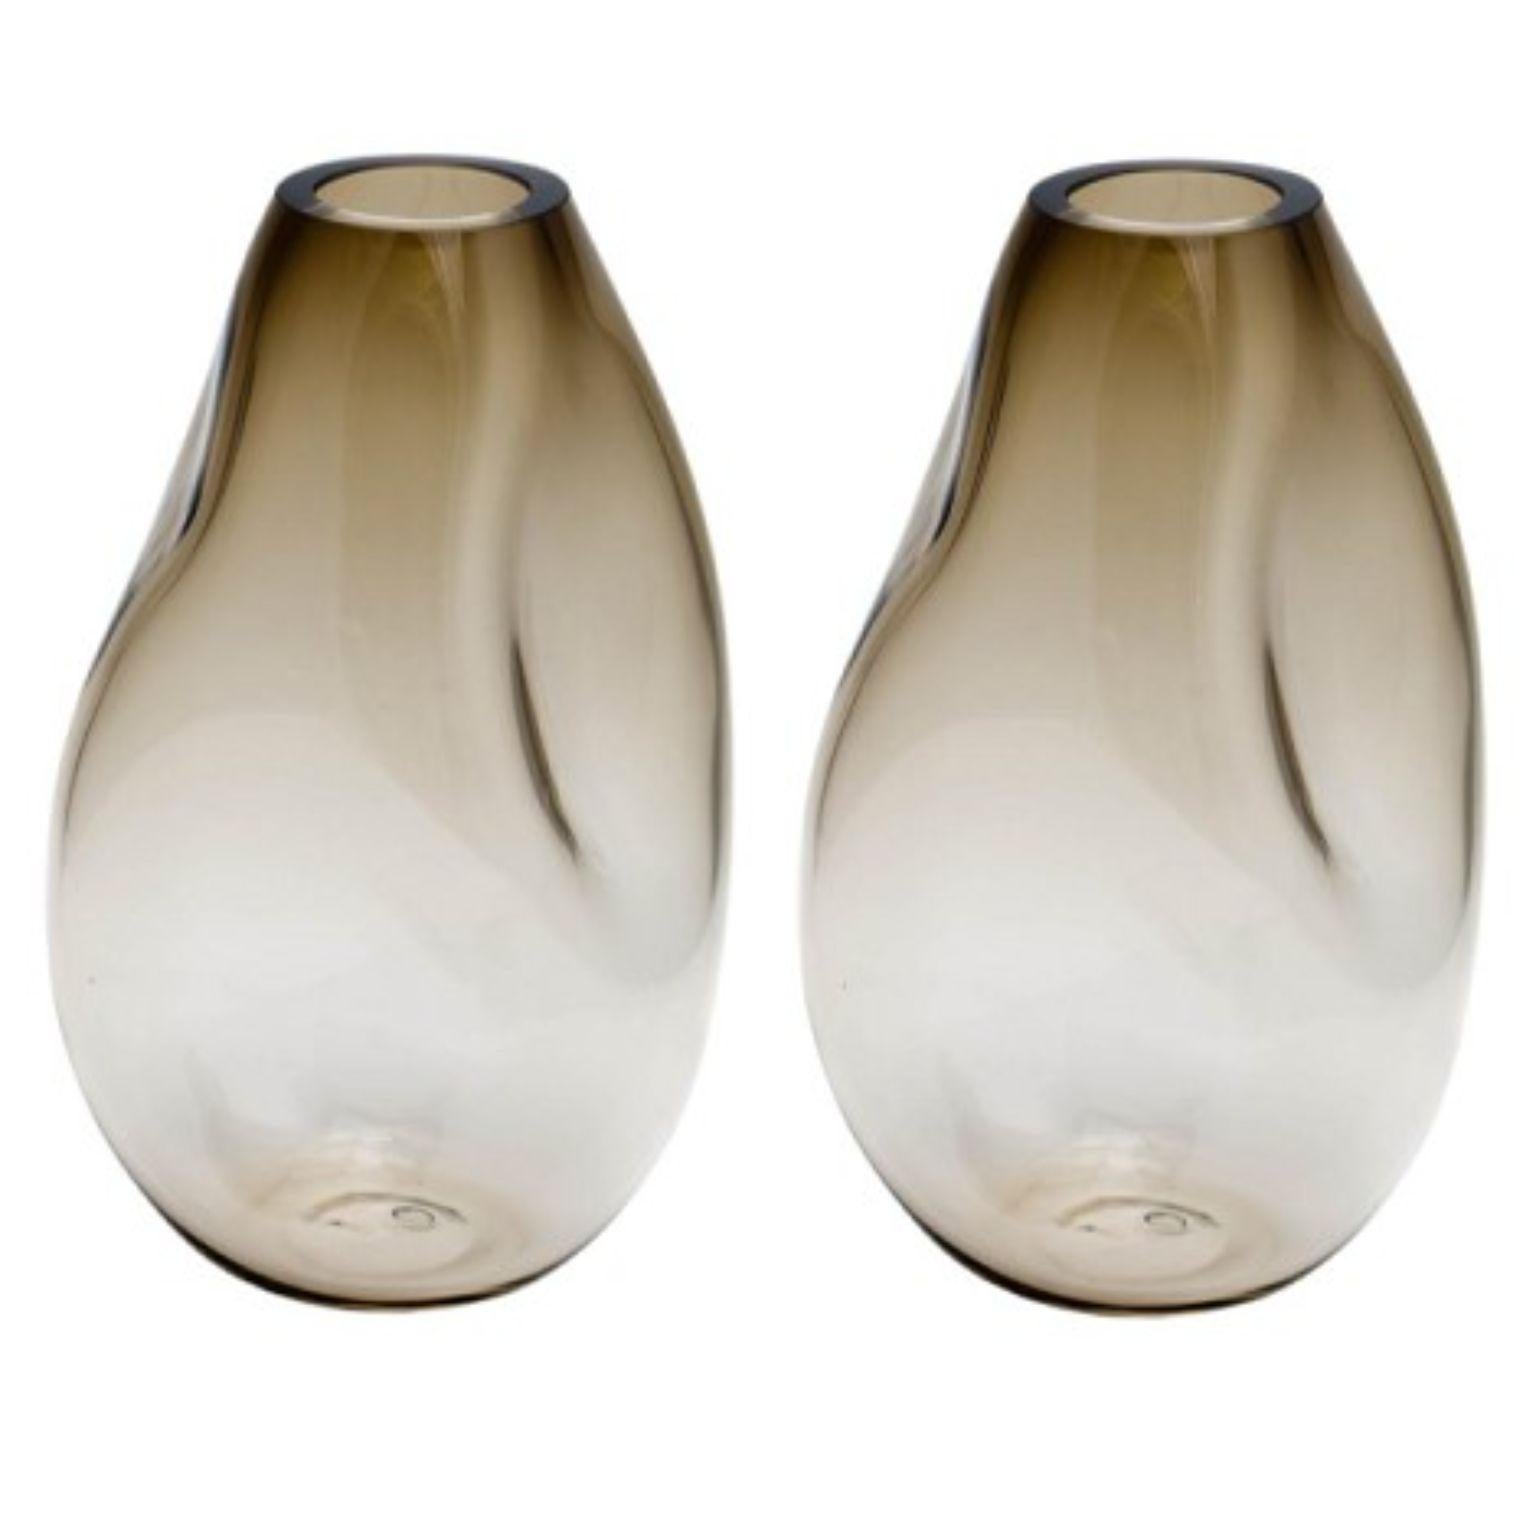 Set of 2 Supernova IV Silver Smoke L Vases by Eloa.
No UL listed 
Material: Glass
Dimensions: D15 x W17 x H41 cm
Also Available in different colours and dimensions.

SUPERNOVA is a collection of vases and bowls that, though they don‘t